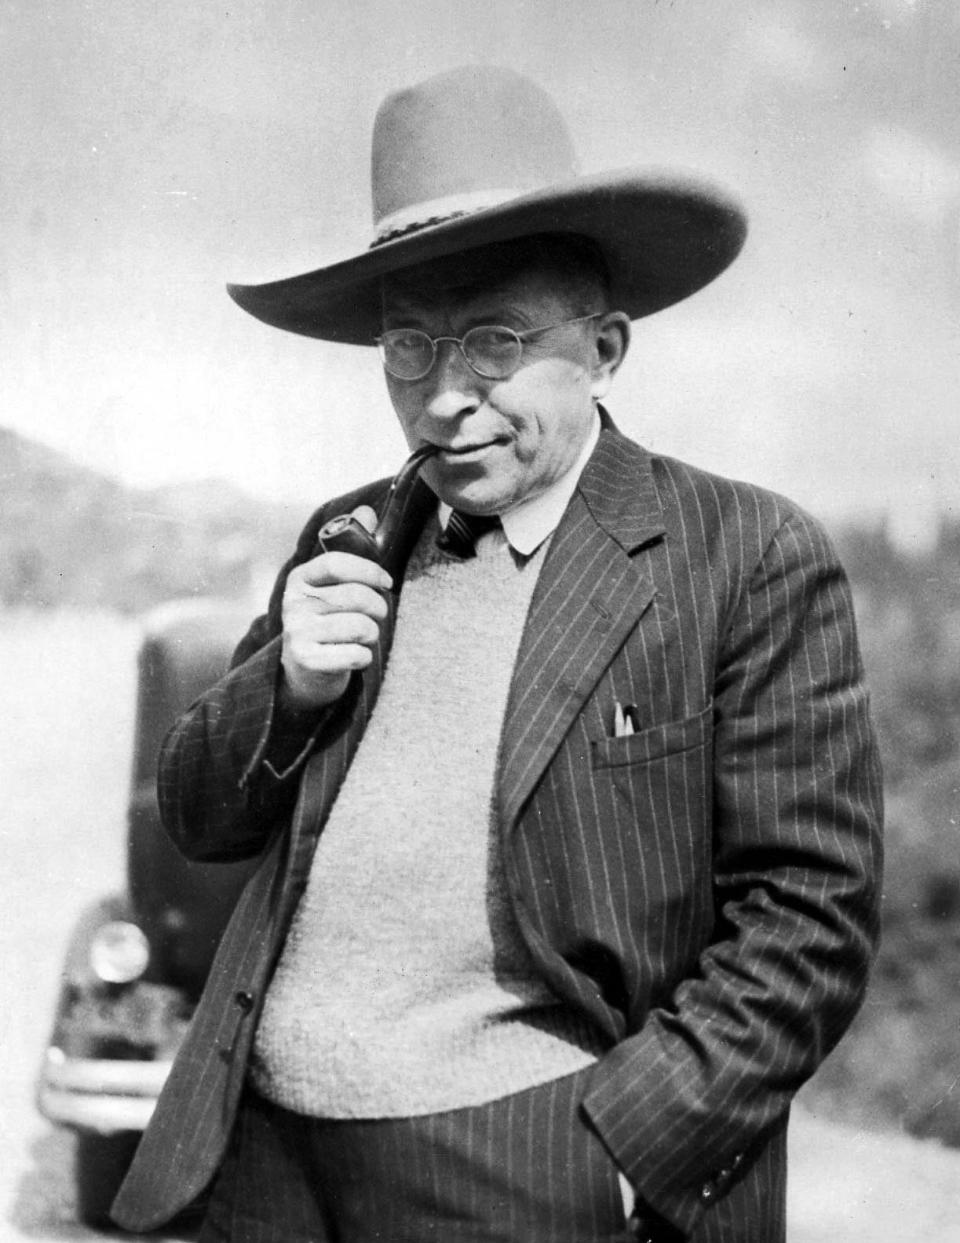 Dr. Frederick Banting, here at Canada's Jasper National Park in Alberta in 1936, discovered insulin and received the Nobel Prize in 1923.